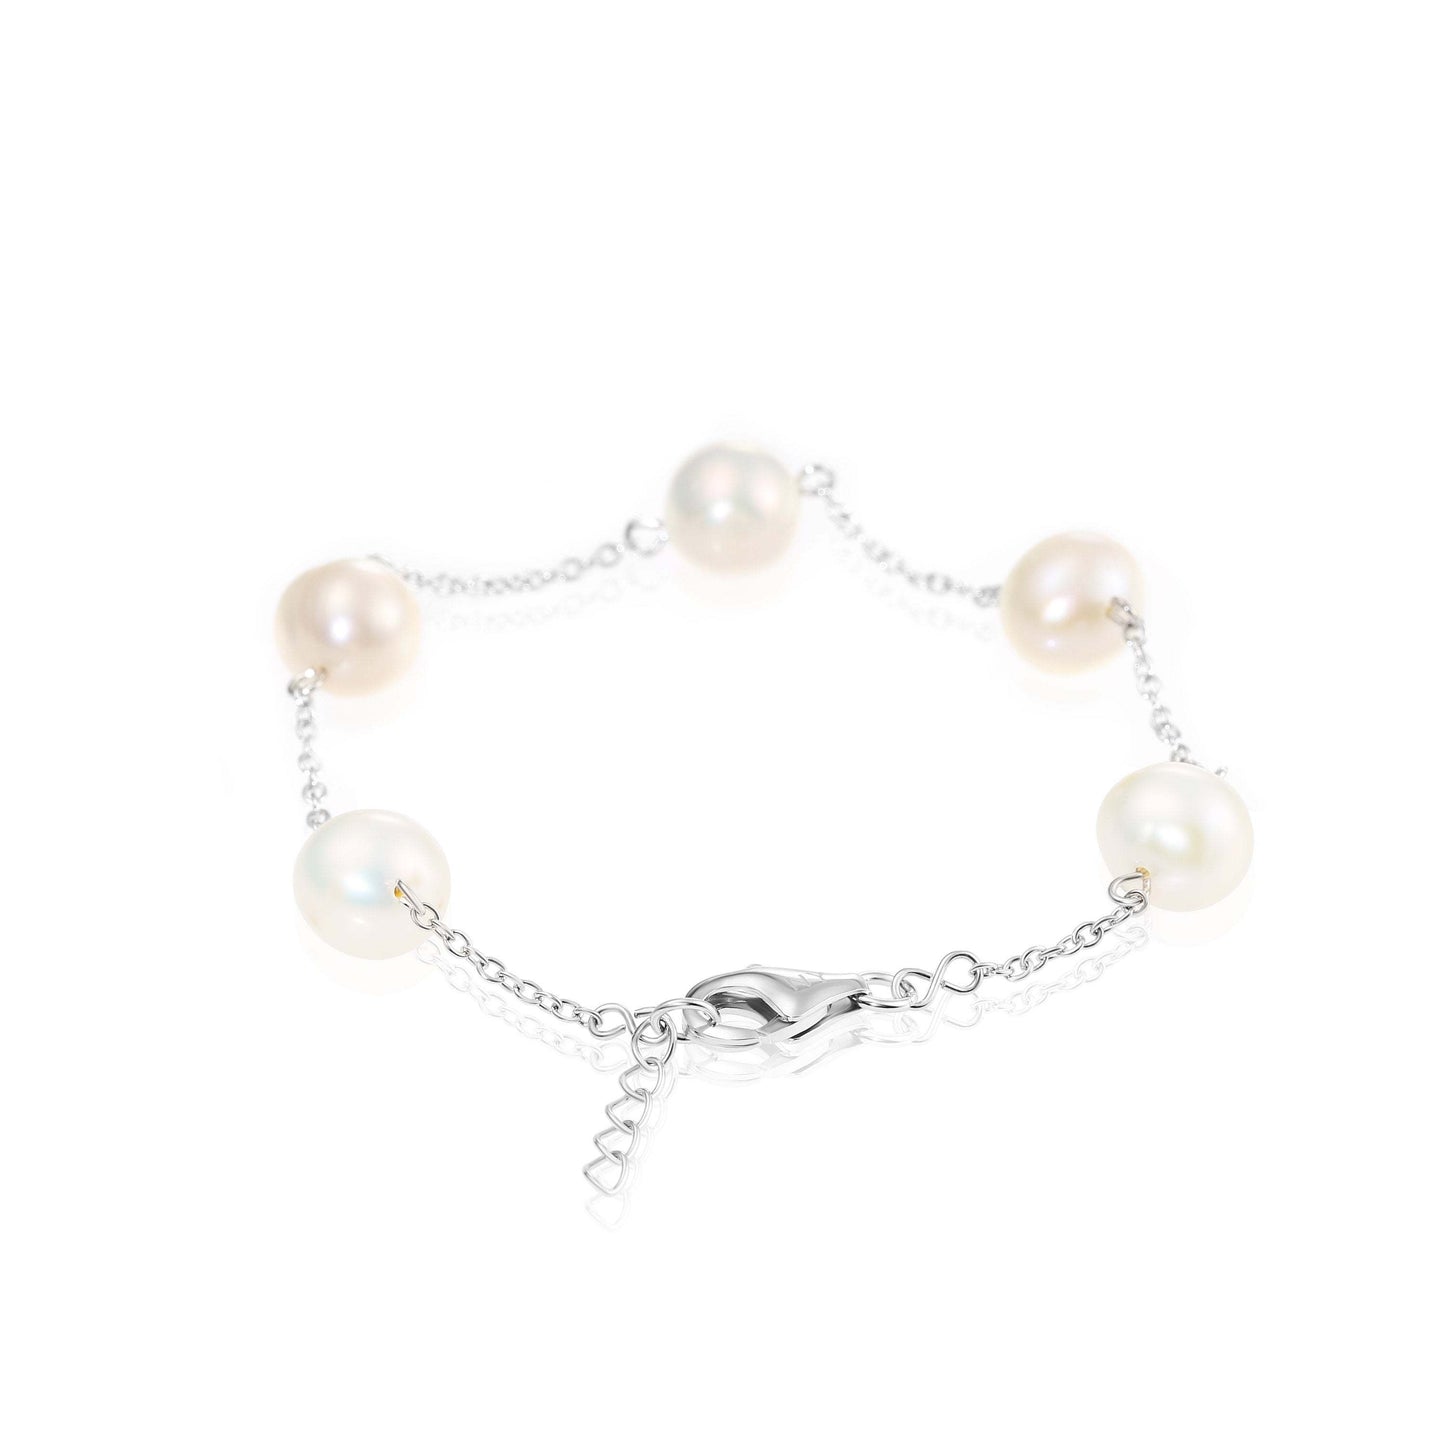 Pearl Bracelet in Sterling Silver, White Freshwater Cultured Pearls, Adjustable Size